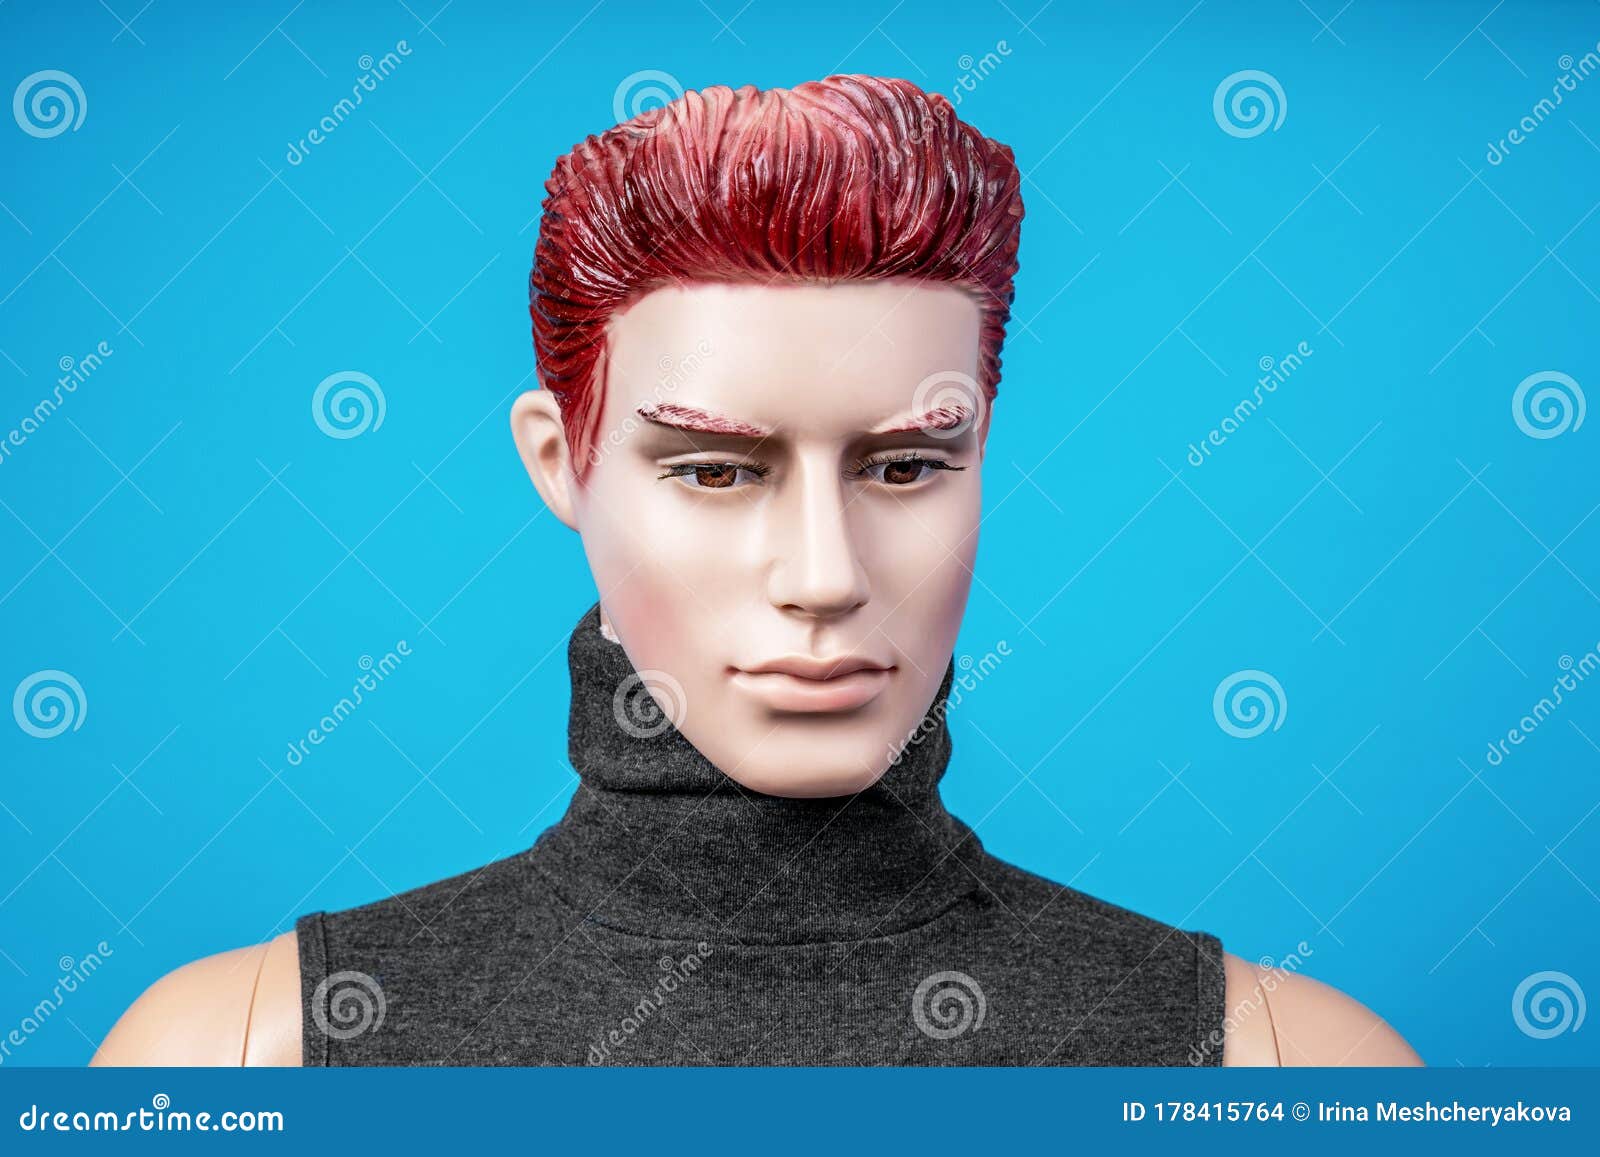 Male Mannequin Head - Red